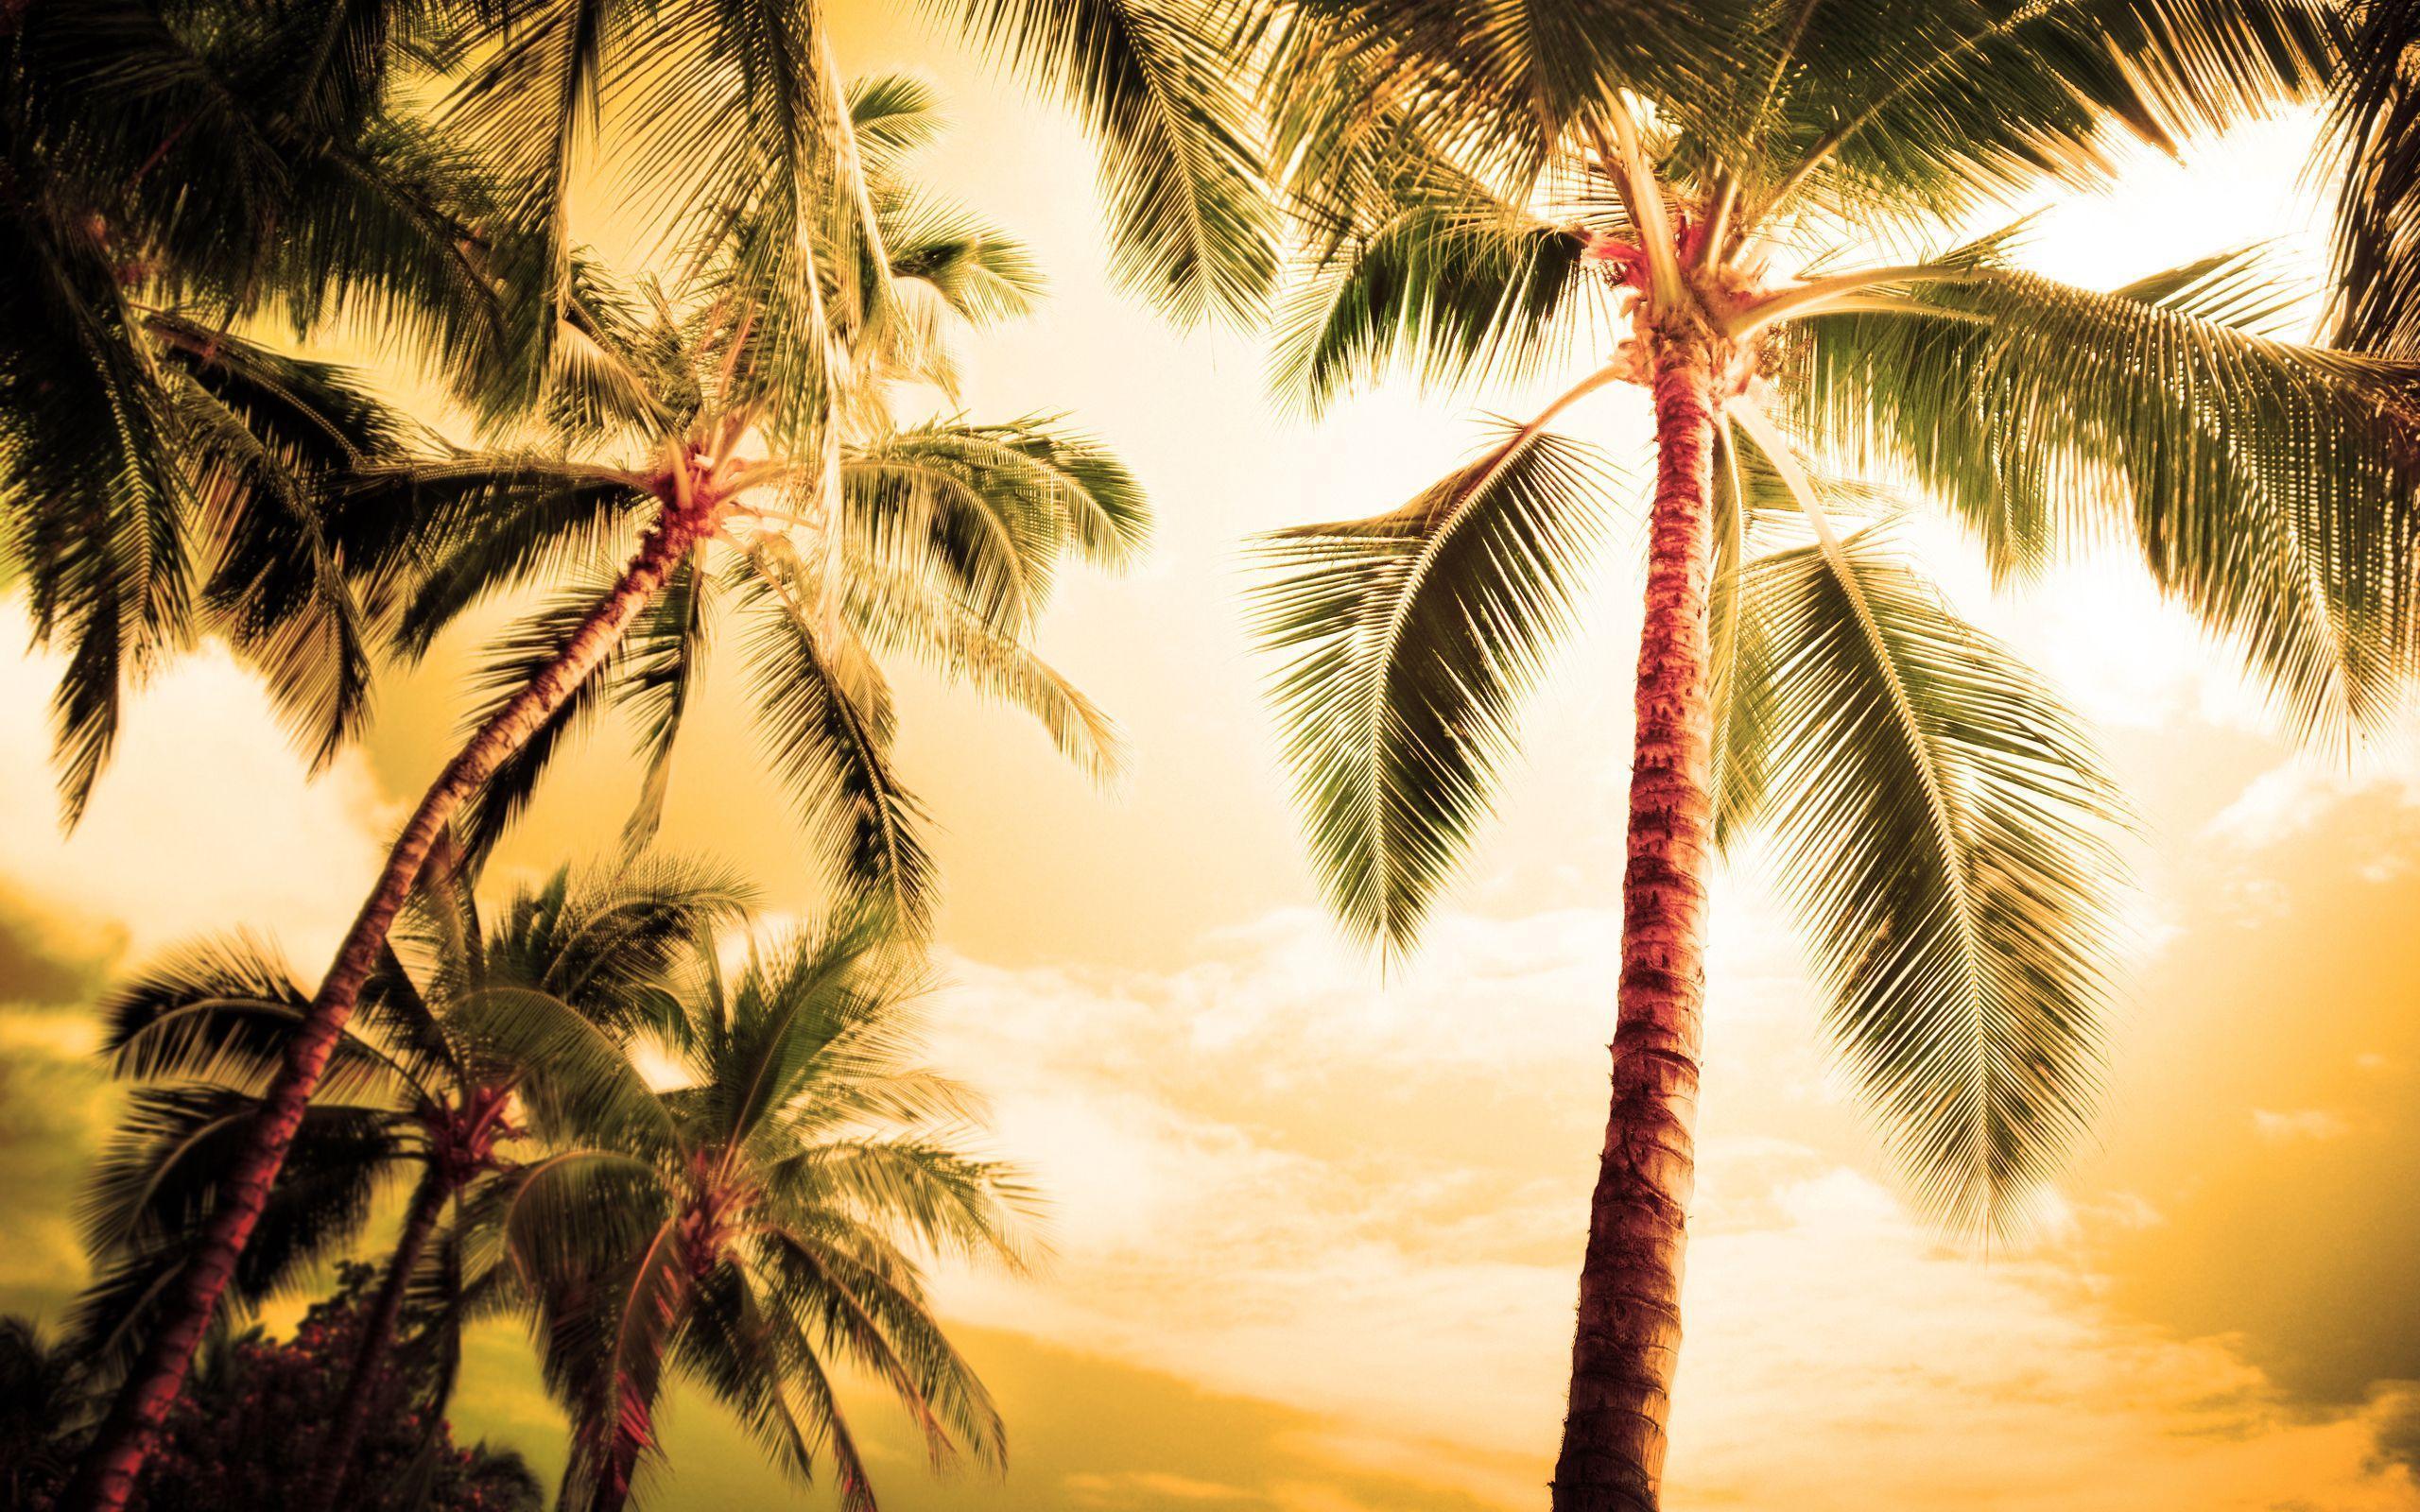 Summer palms wallpaper and image, picture, photo